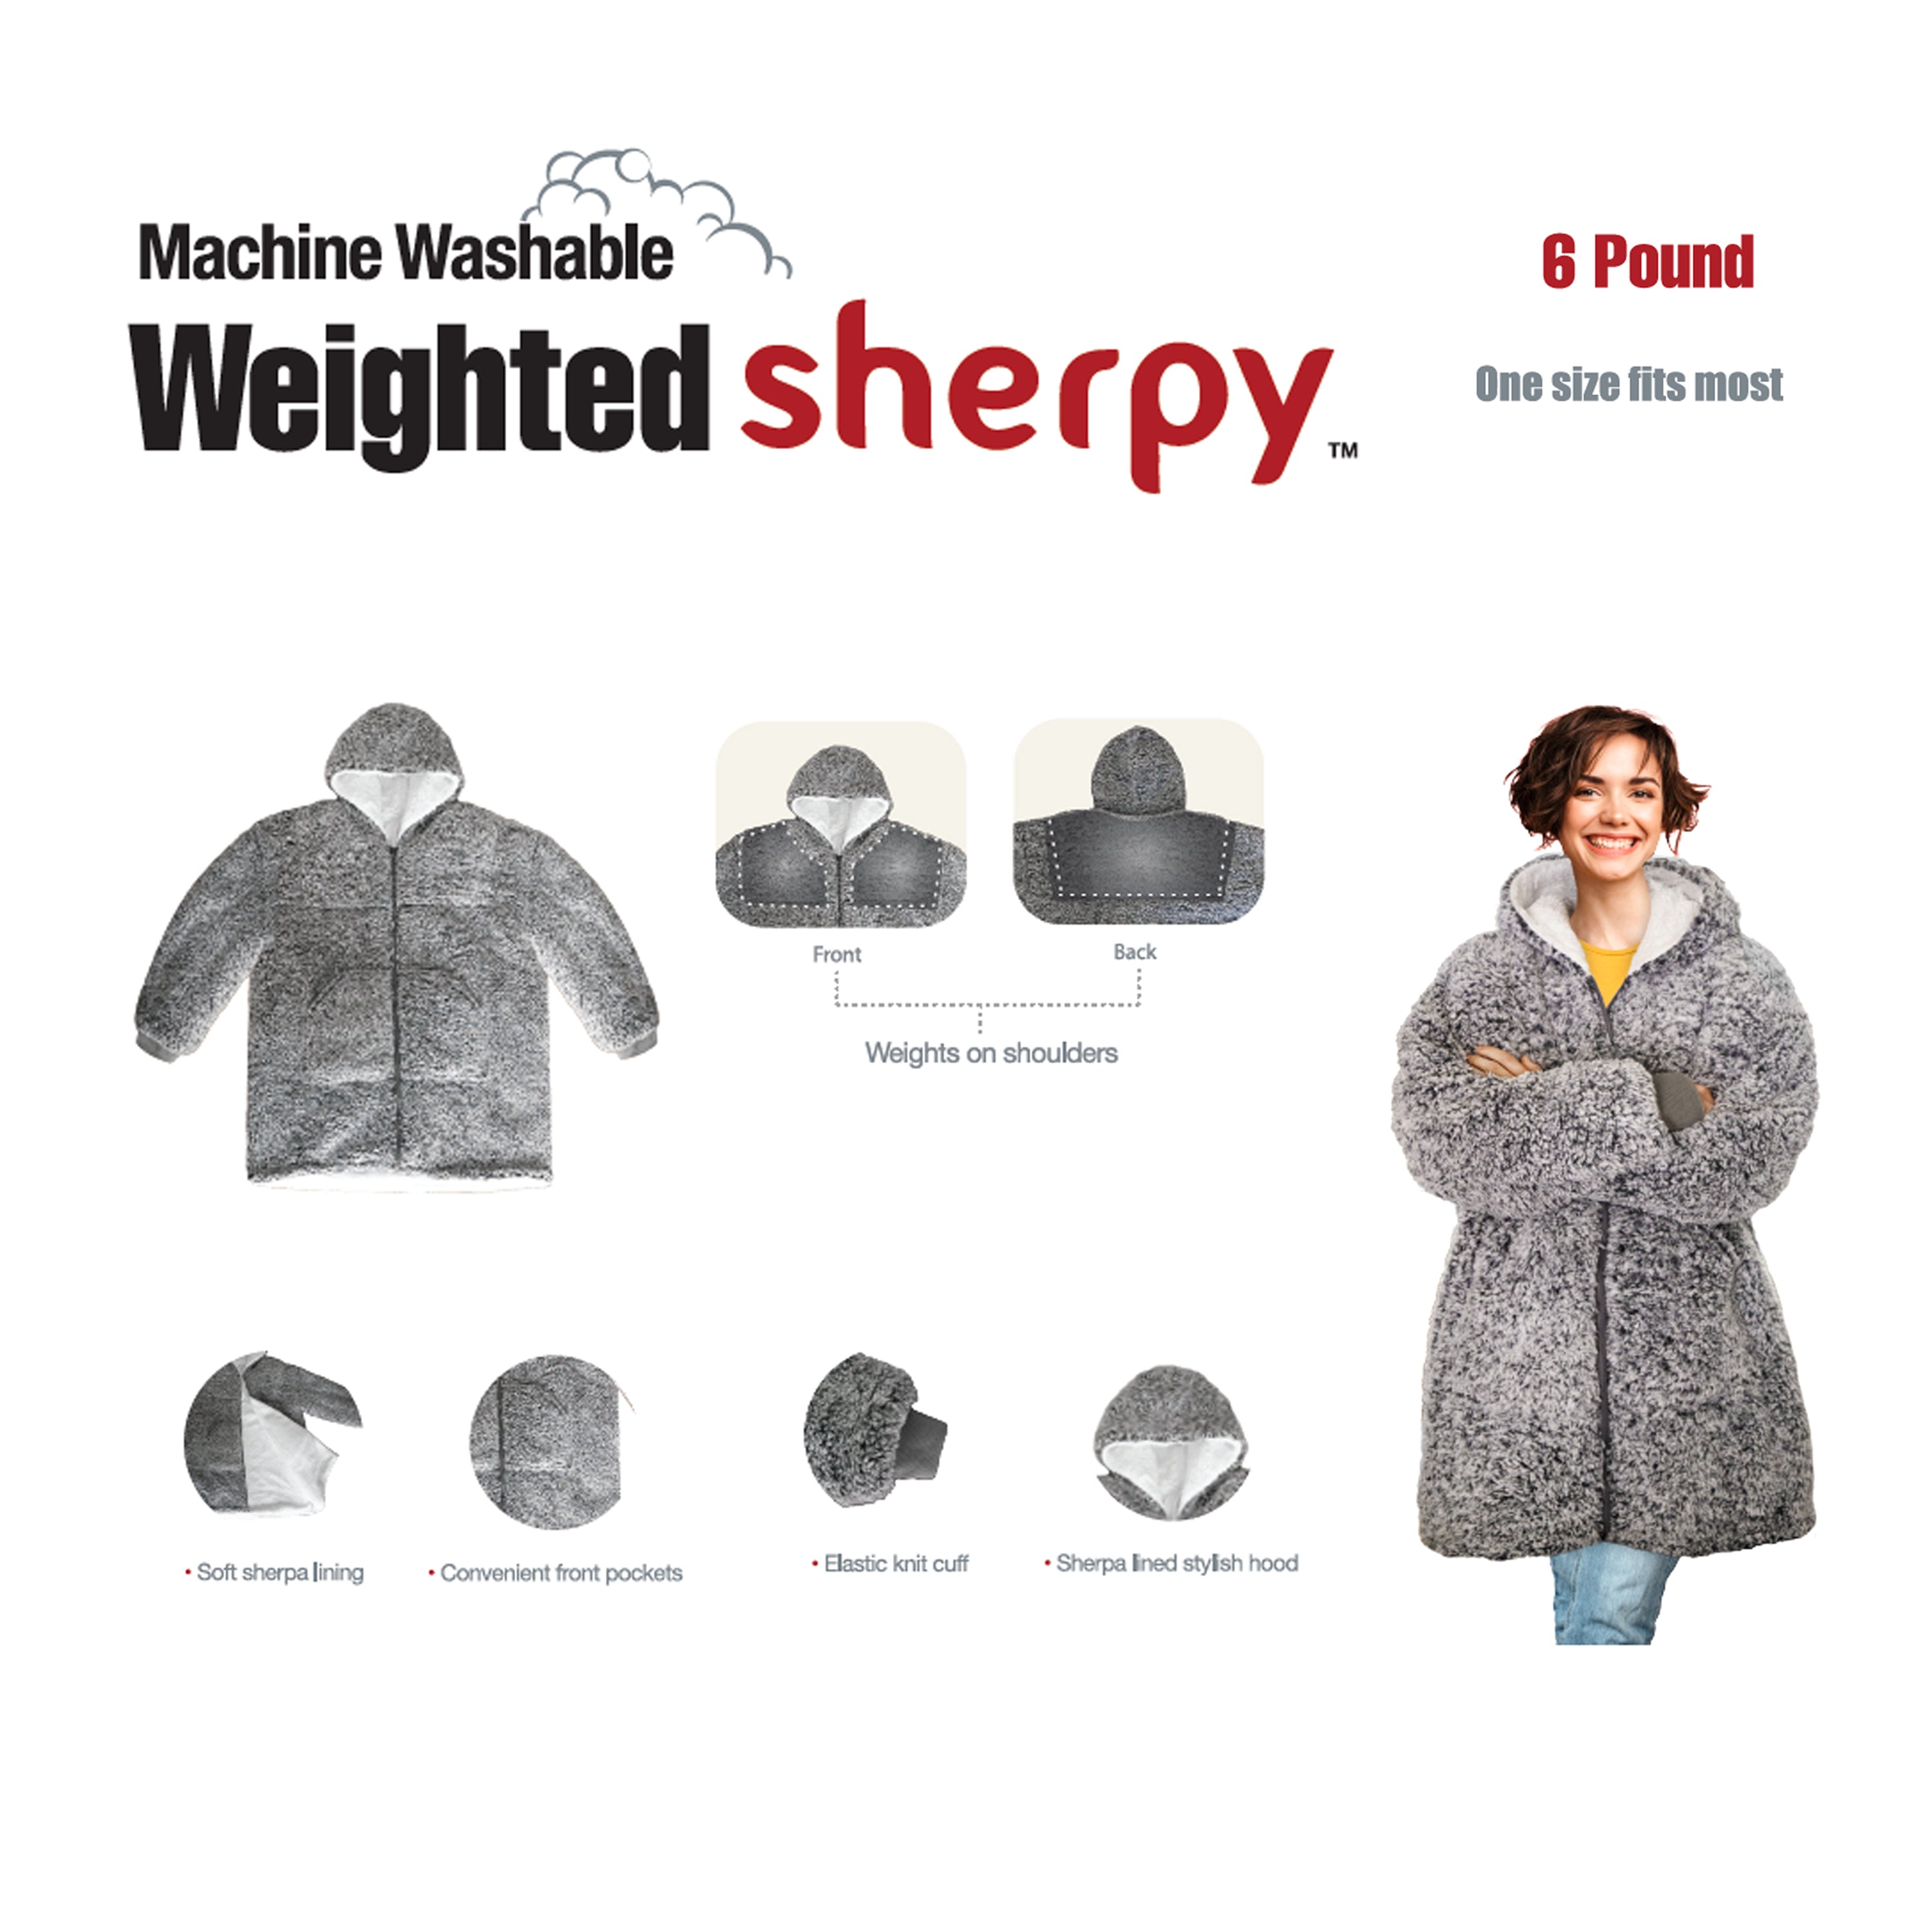 Weighted Teddy Sherpy Machine Washable 6 lb